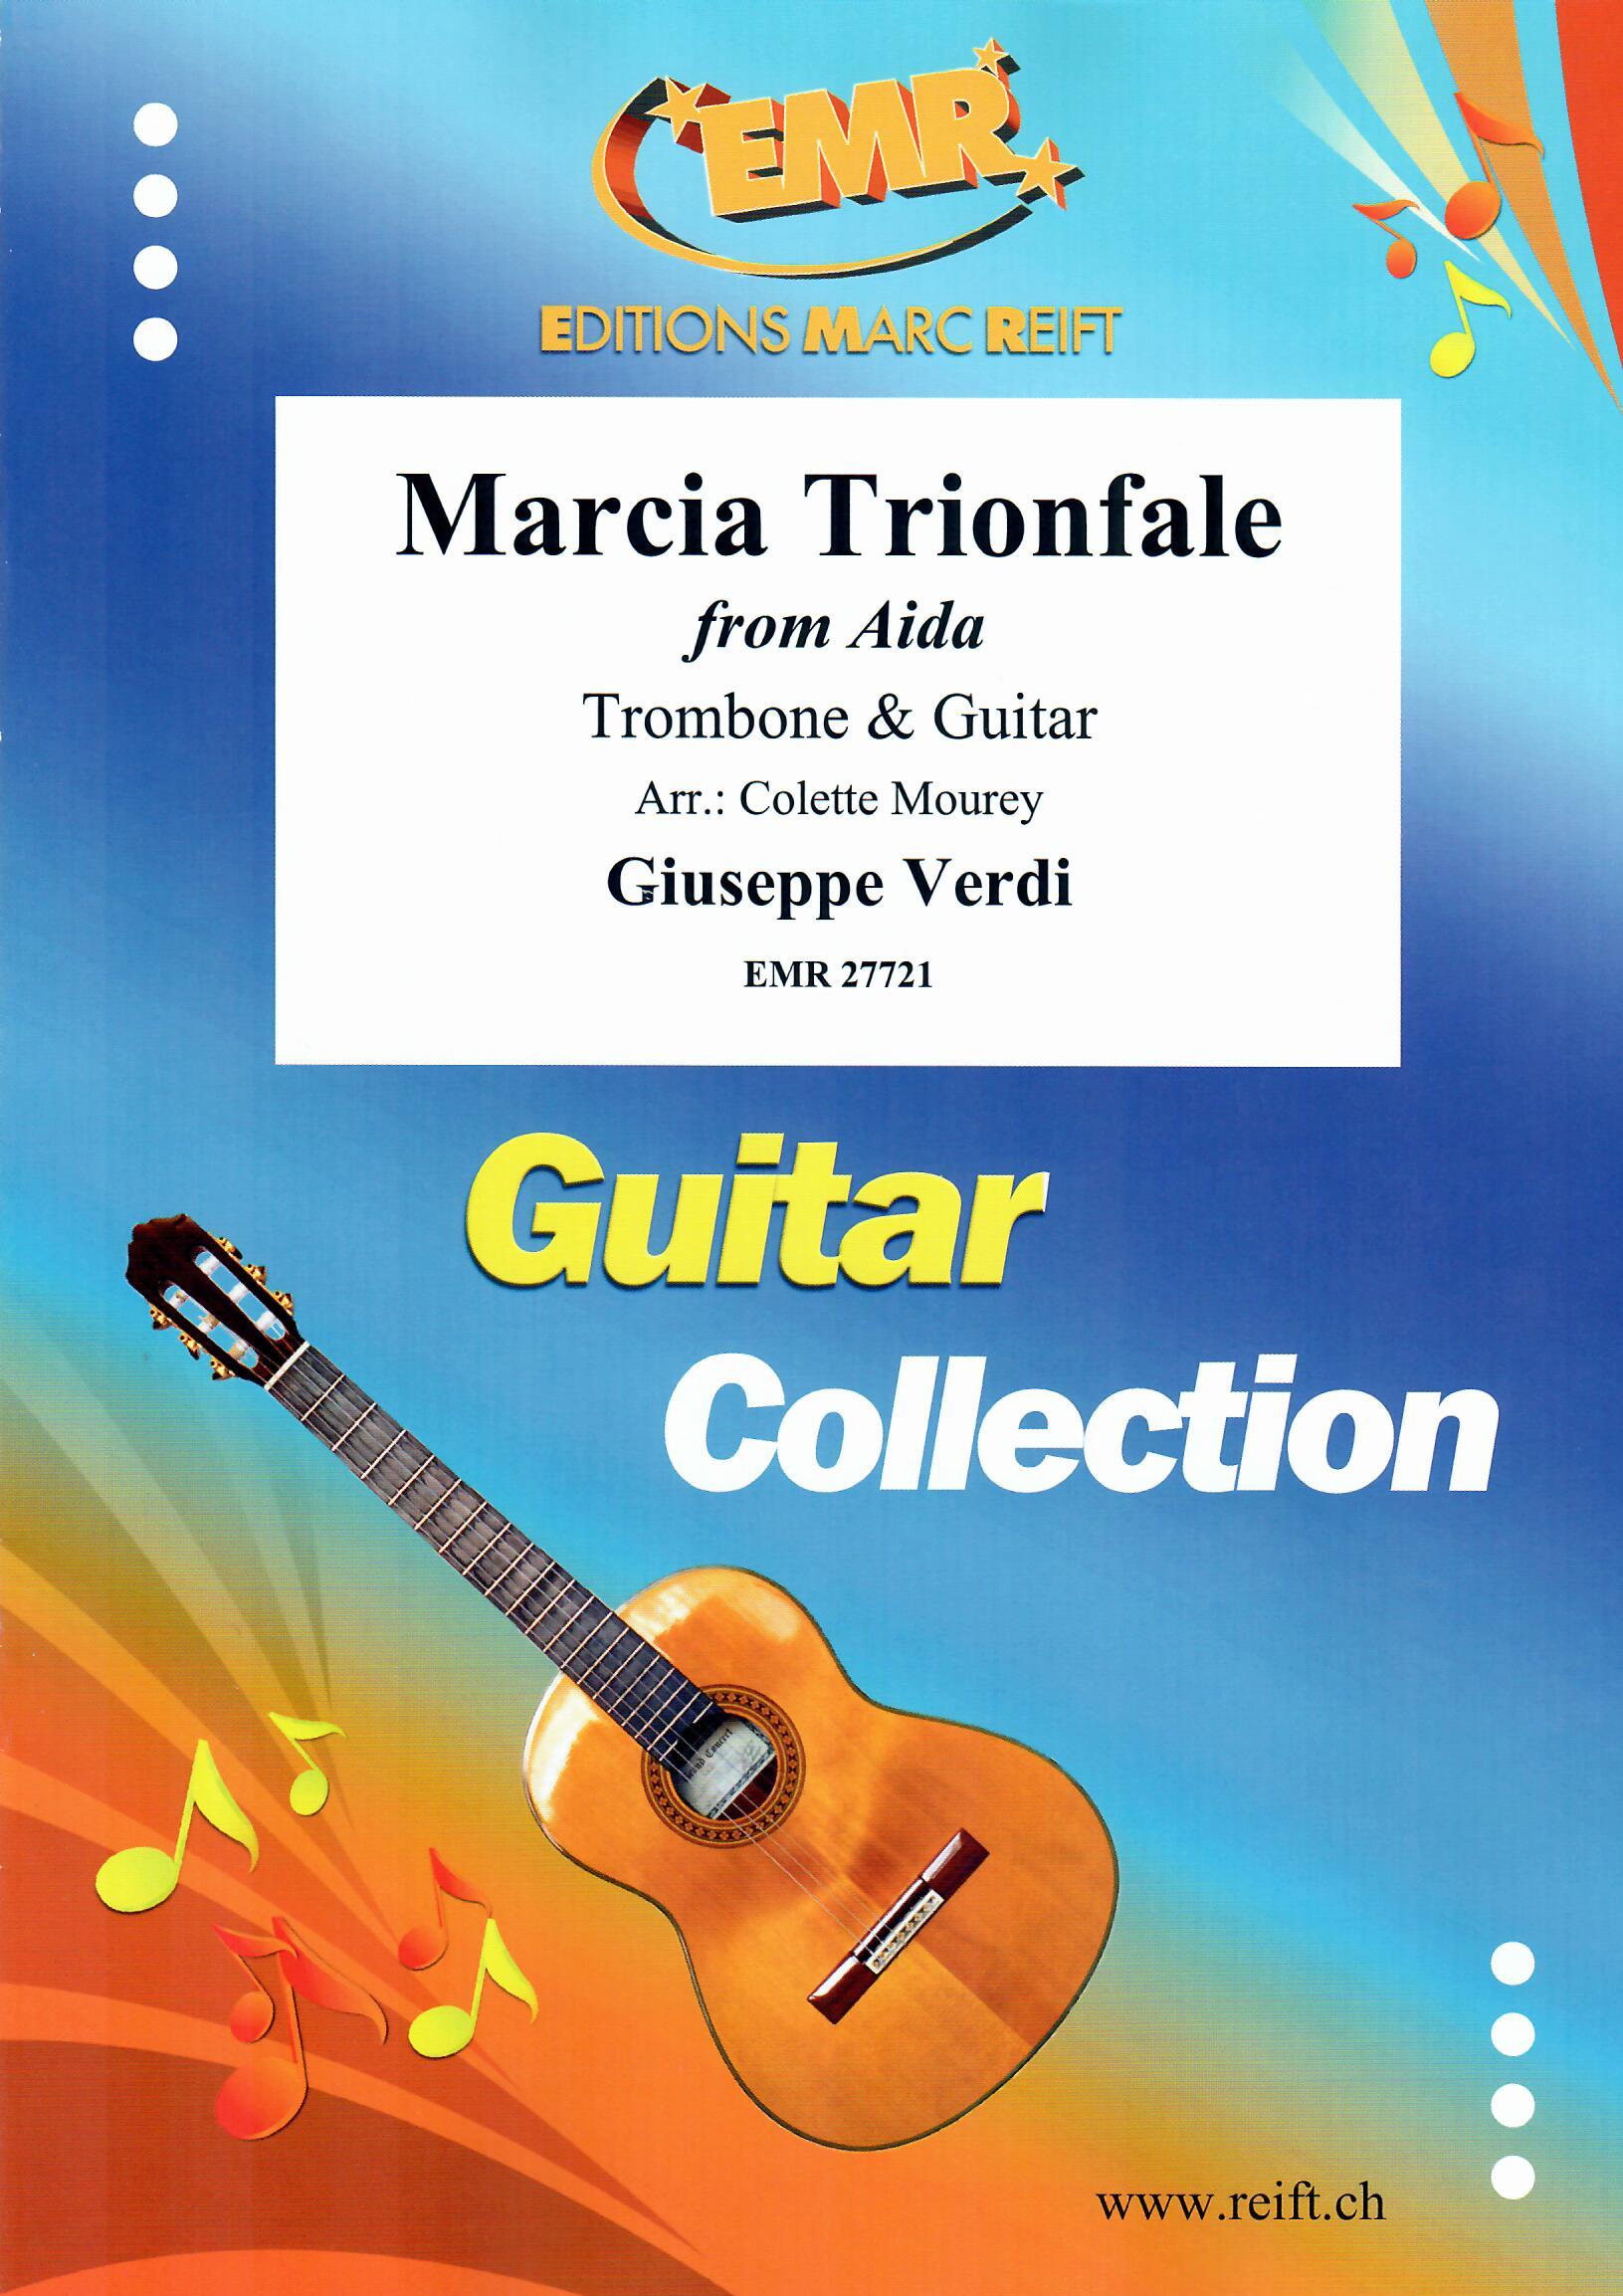 MARCIA TRIONFALE